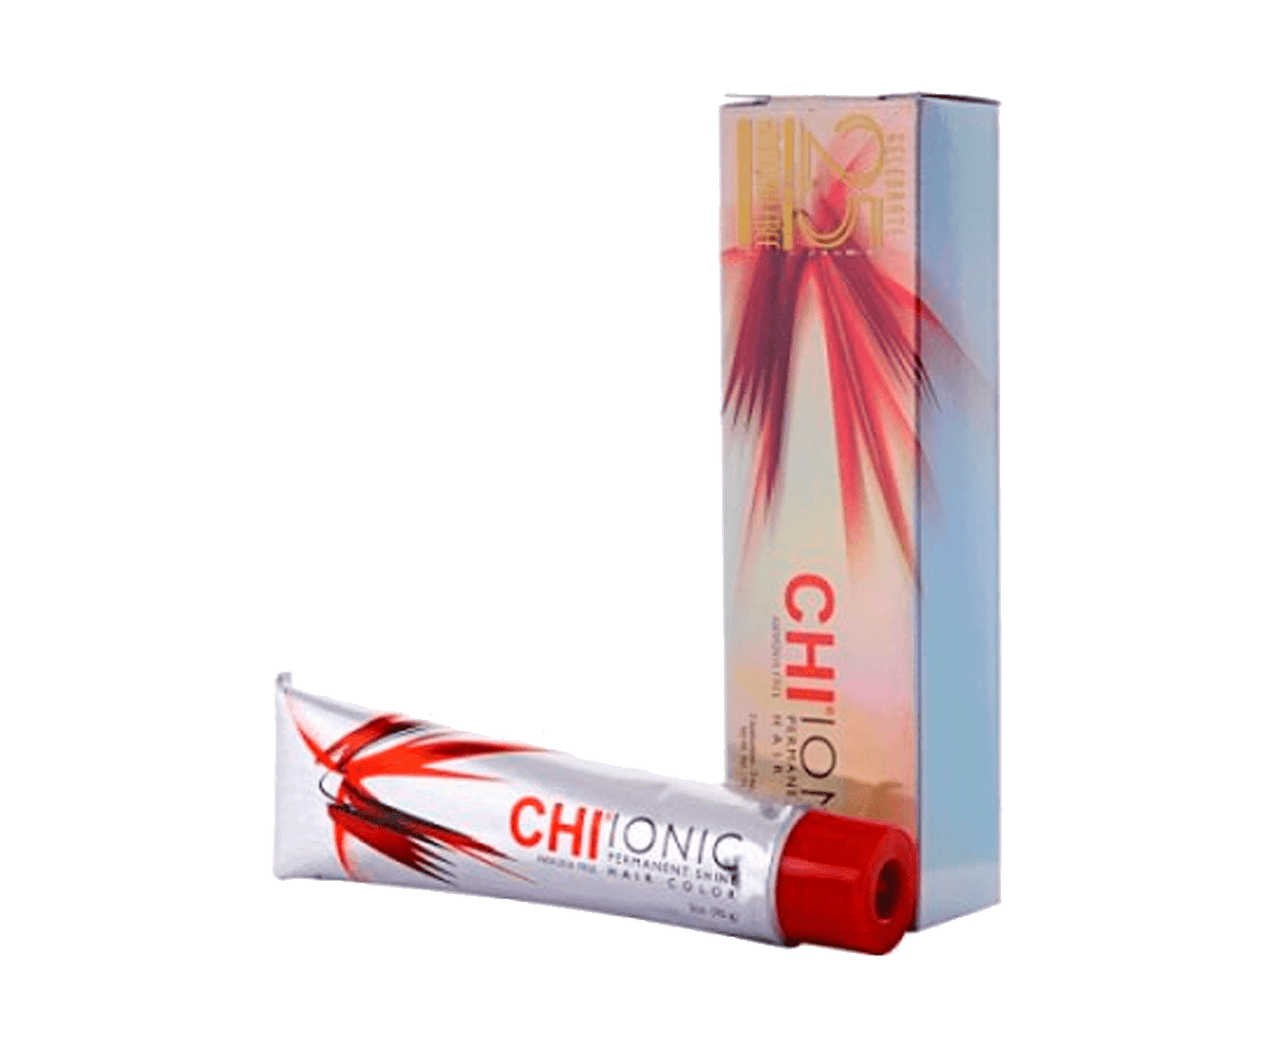 CHI - IONIC_Ionic permanent shine hair color 3oz._Cosmetic World